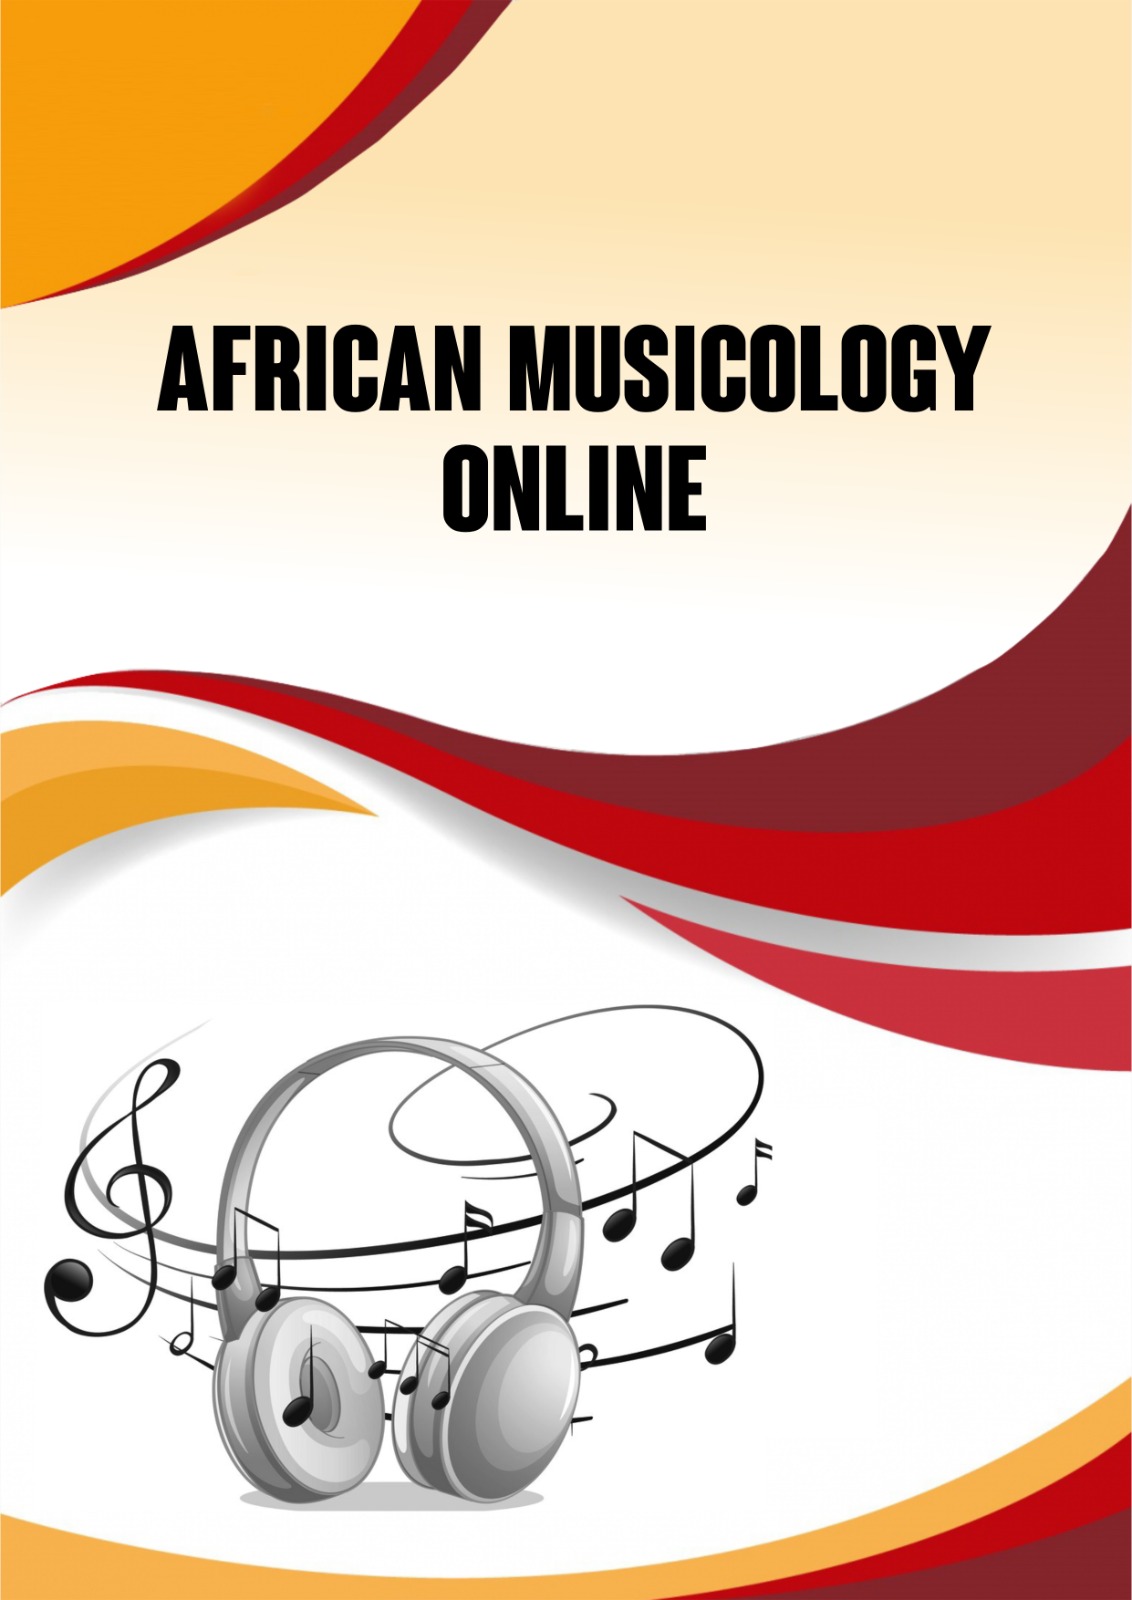 African Musicology Online